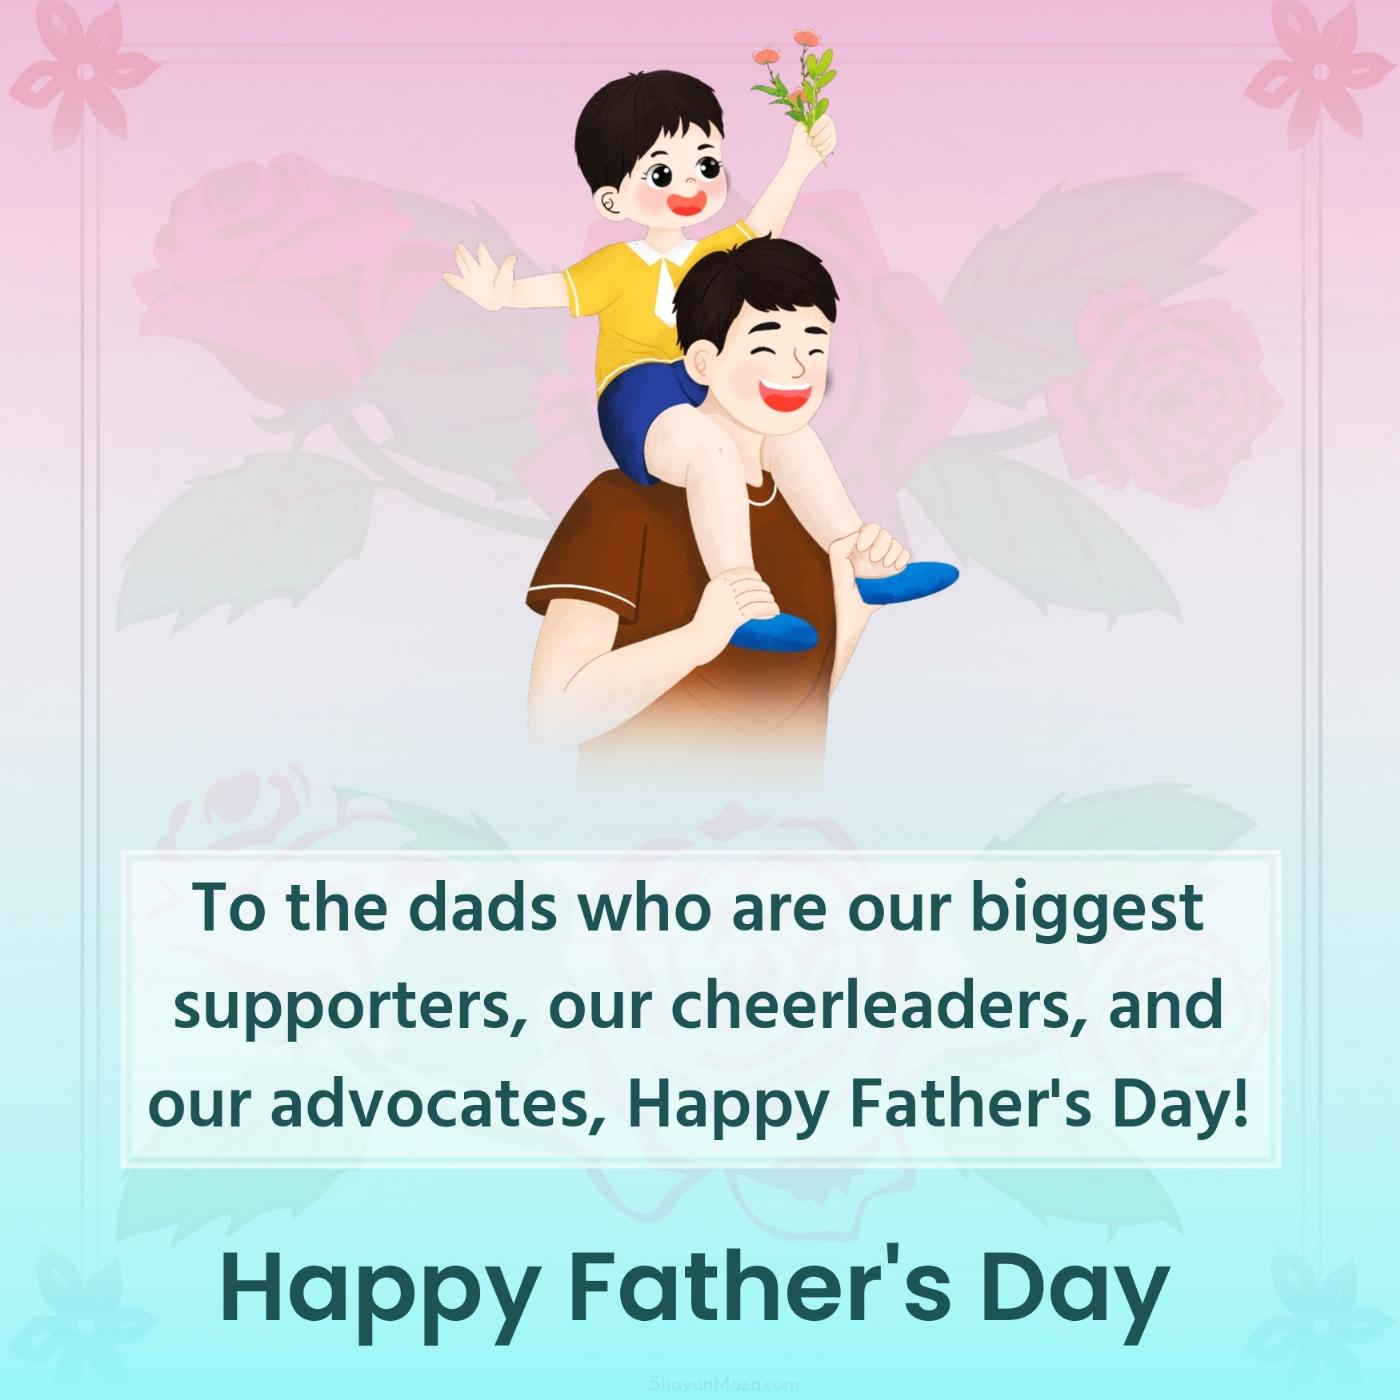 To the dads who are our biggest supporters our cheerleaders